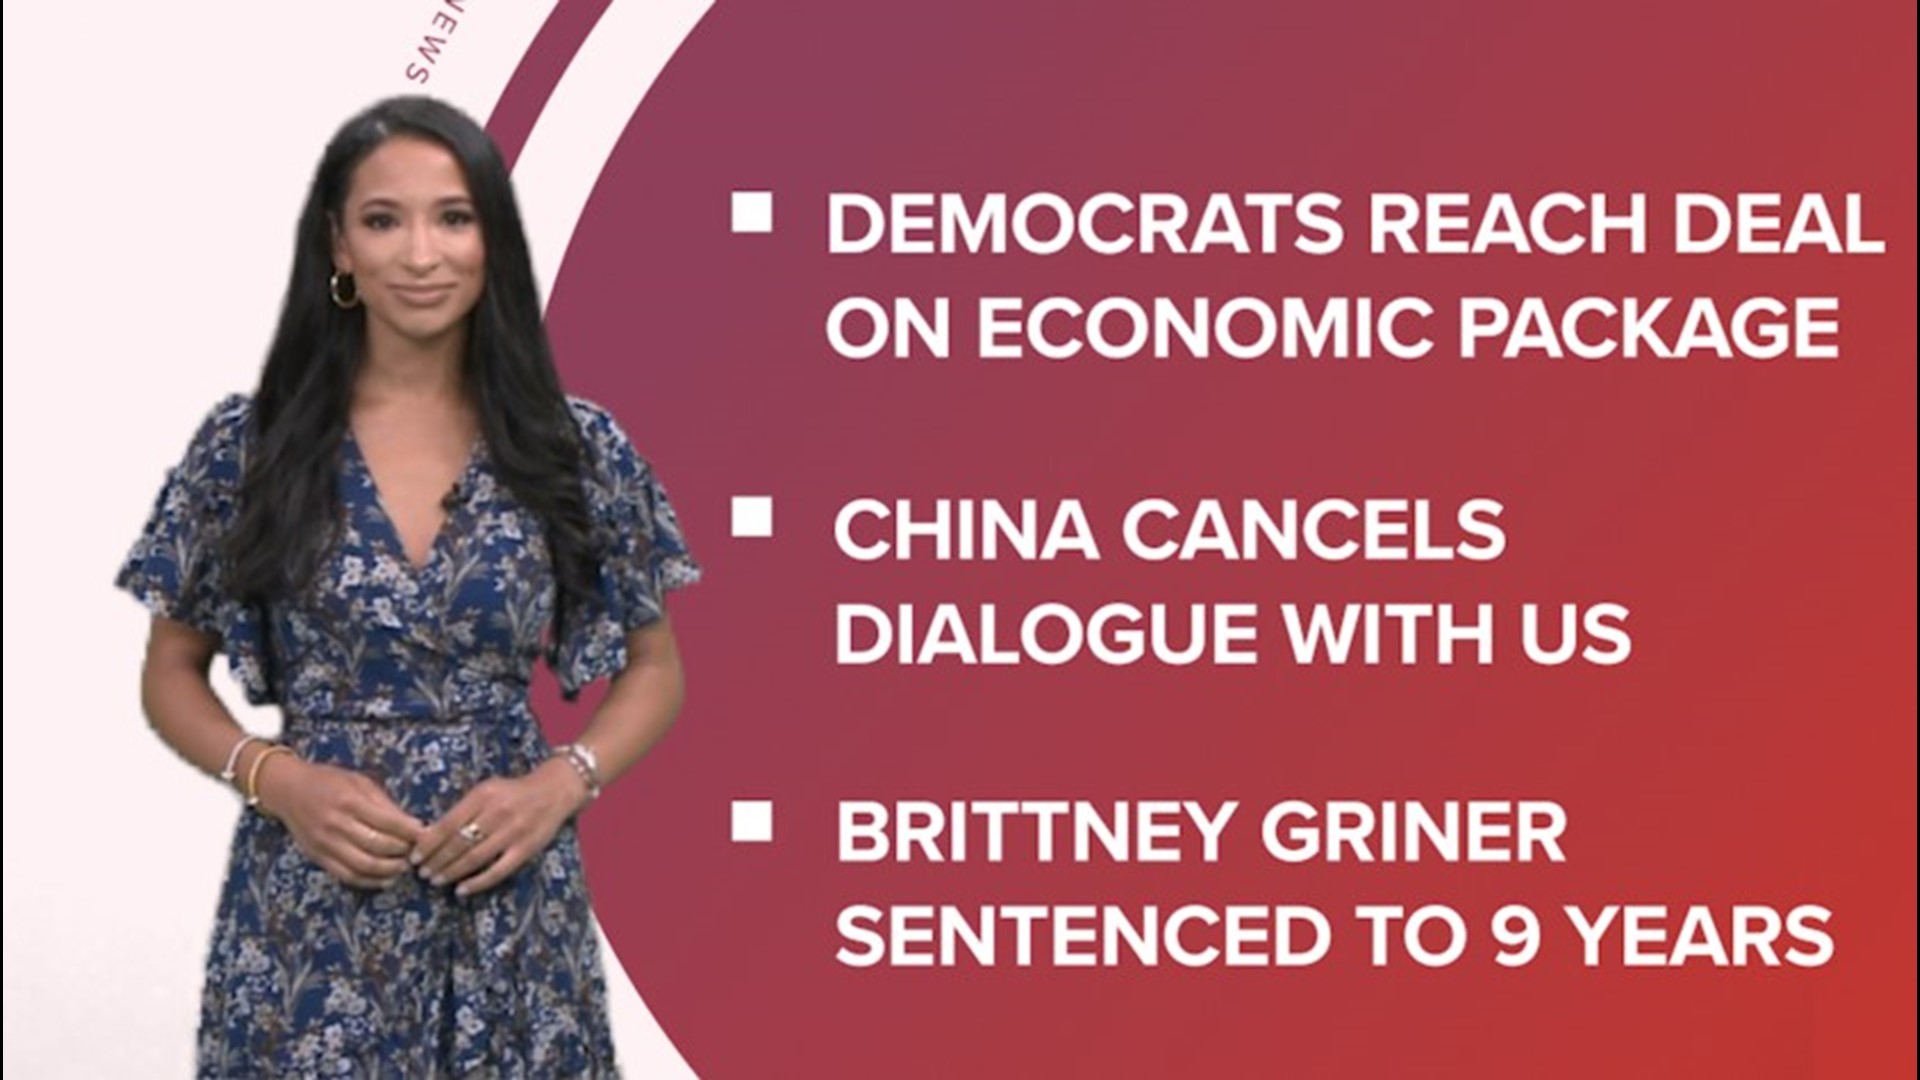 A look at what is happening in the news from Democrats agreeing on an economic package, China canceling talks with the US, and possible new refund rules for airlines